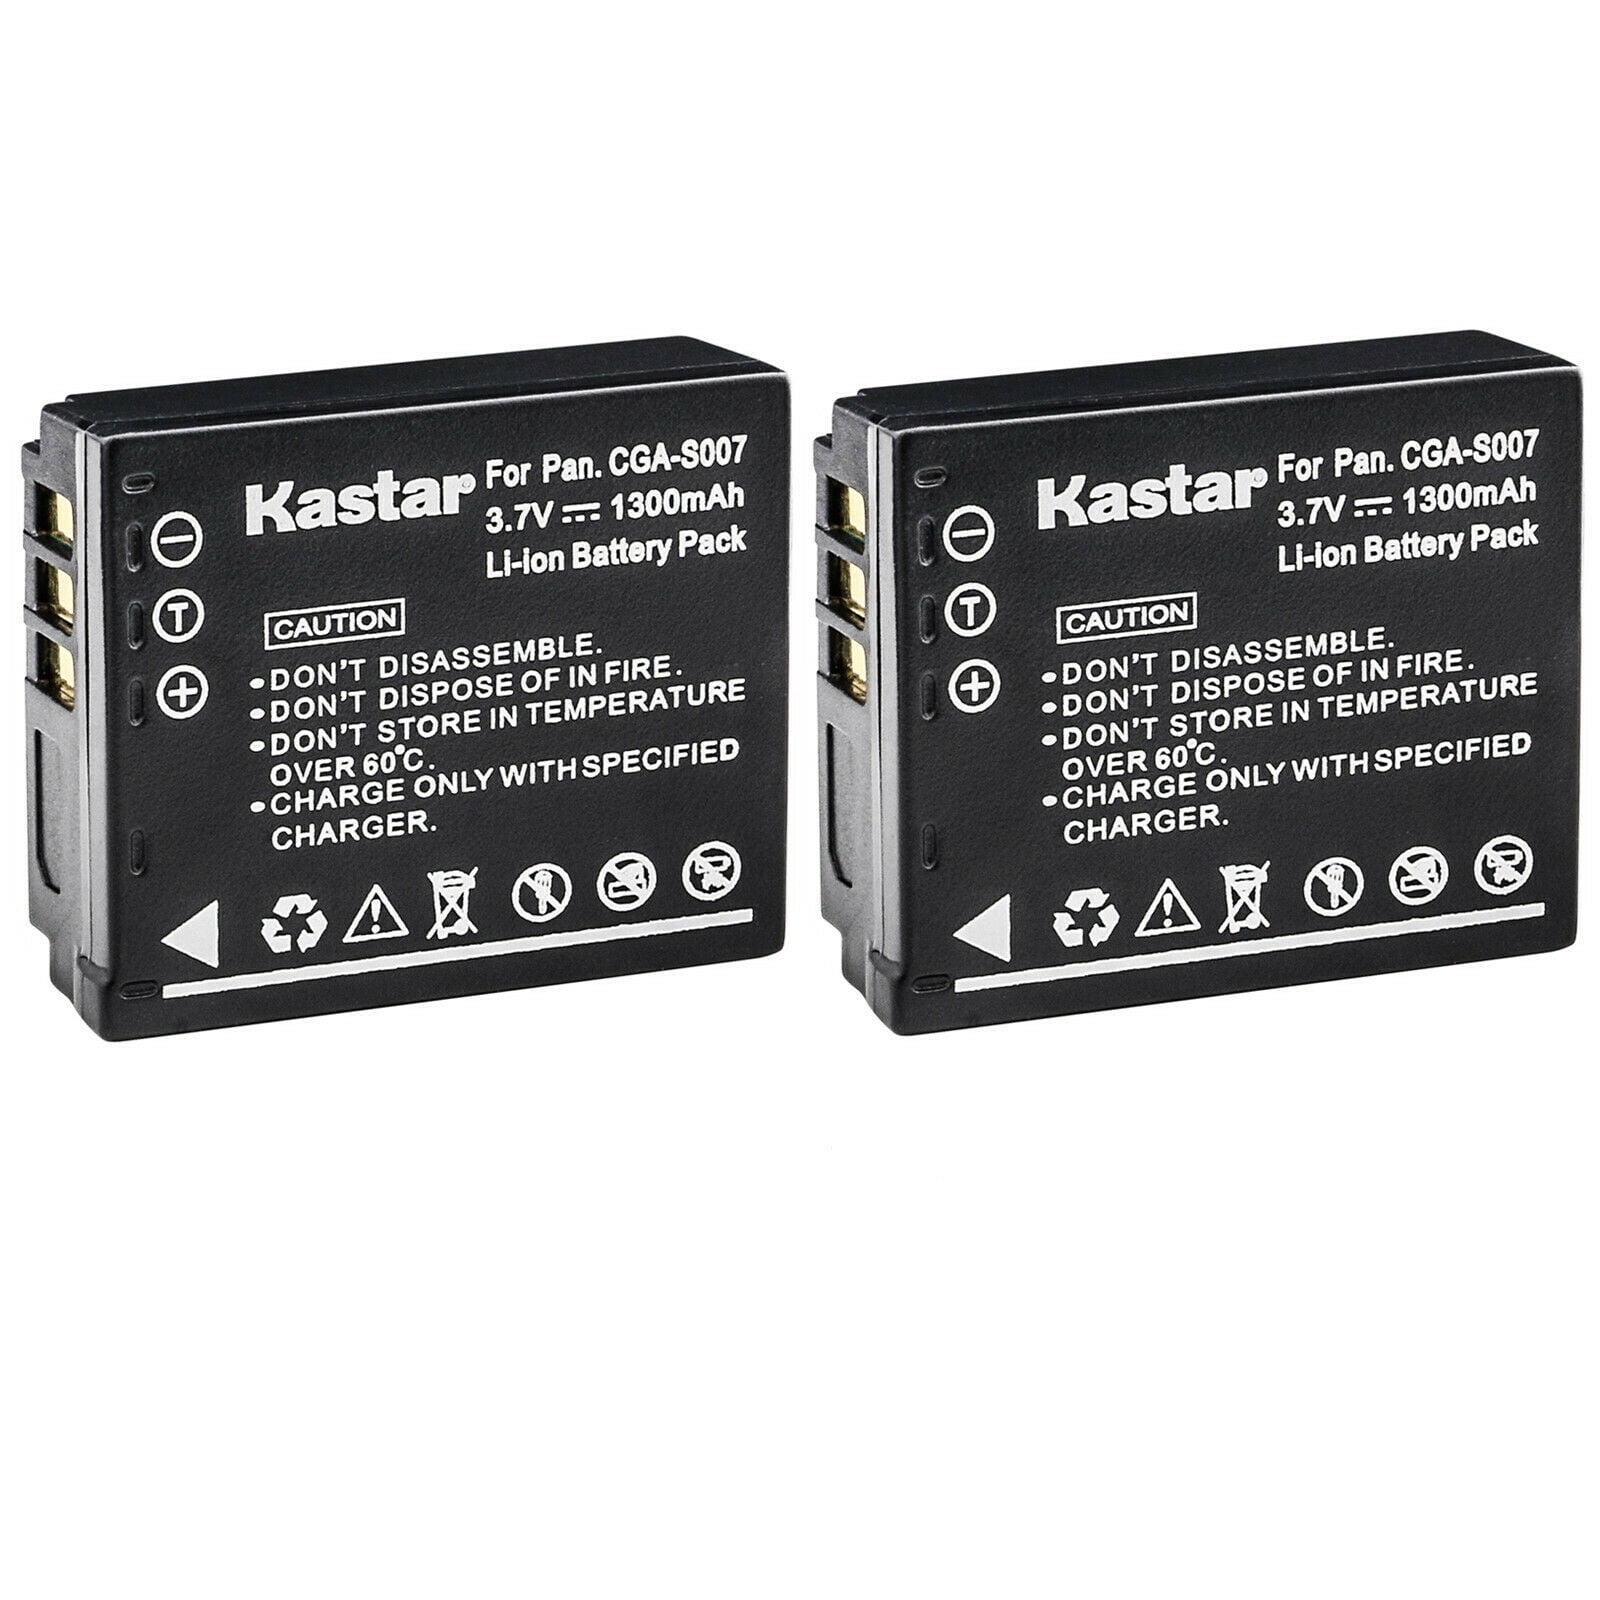 Kastar 2-Pack CGA-S007 Battery Replacement for Panasonic Lumix Lumix DMC-TZ4, Lumix DMC-TZ4K, DMC-TZ4S, Lumix DMC-TZ5, Lumix DMC-TZ5A, Lumix DMC-TZ5K, Camera - Walmart.com